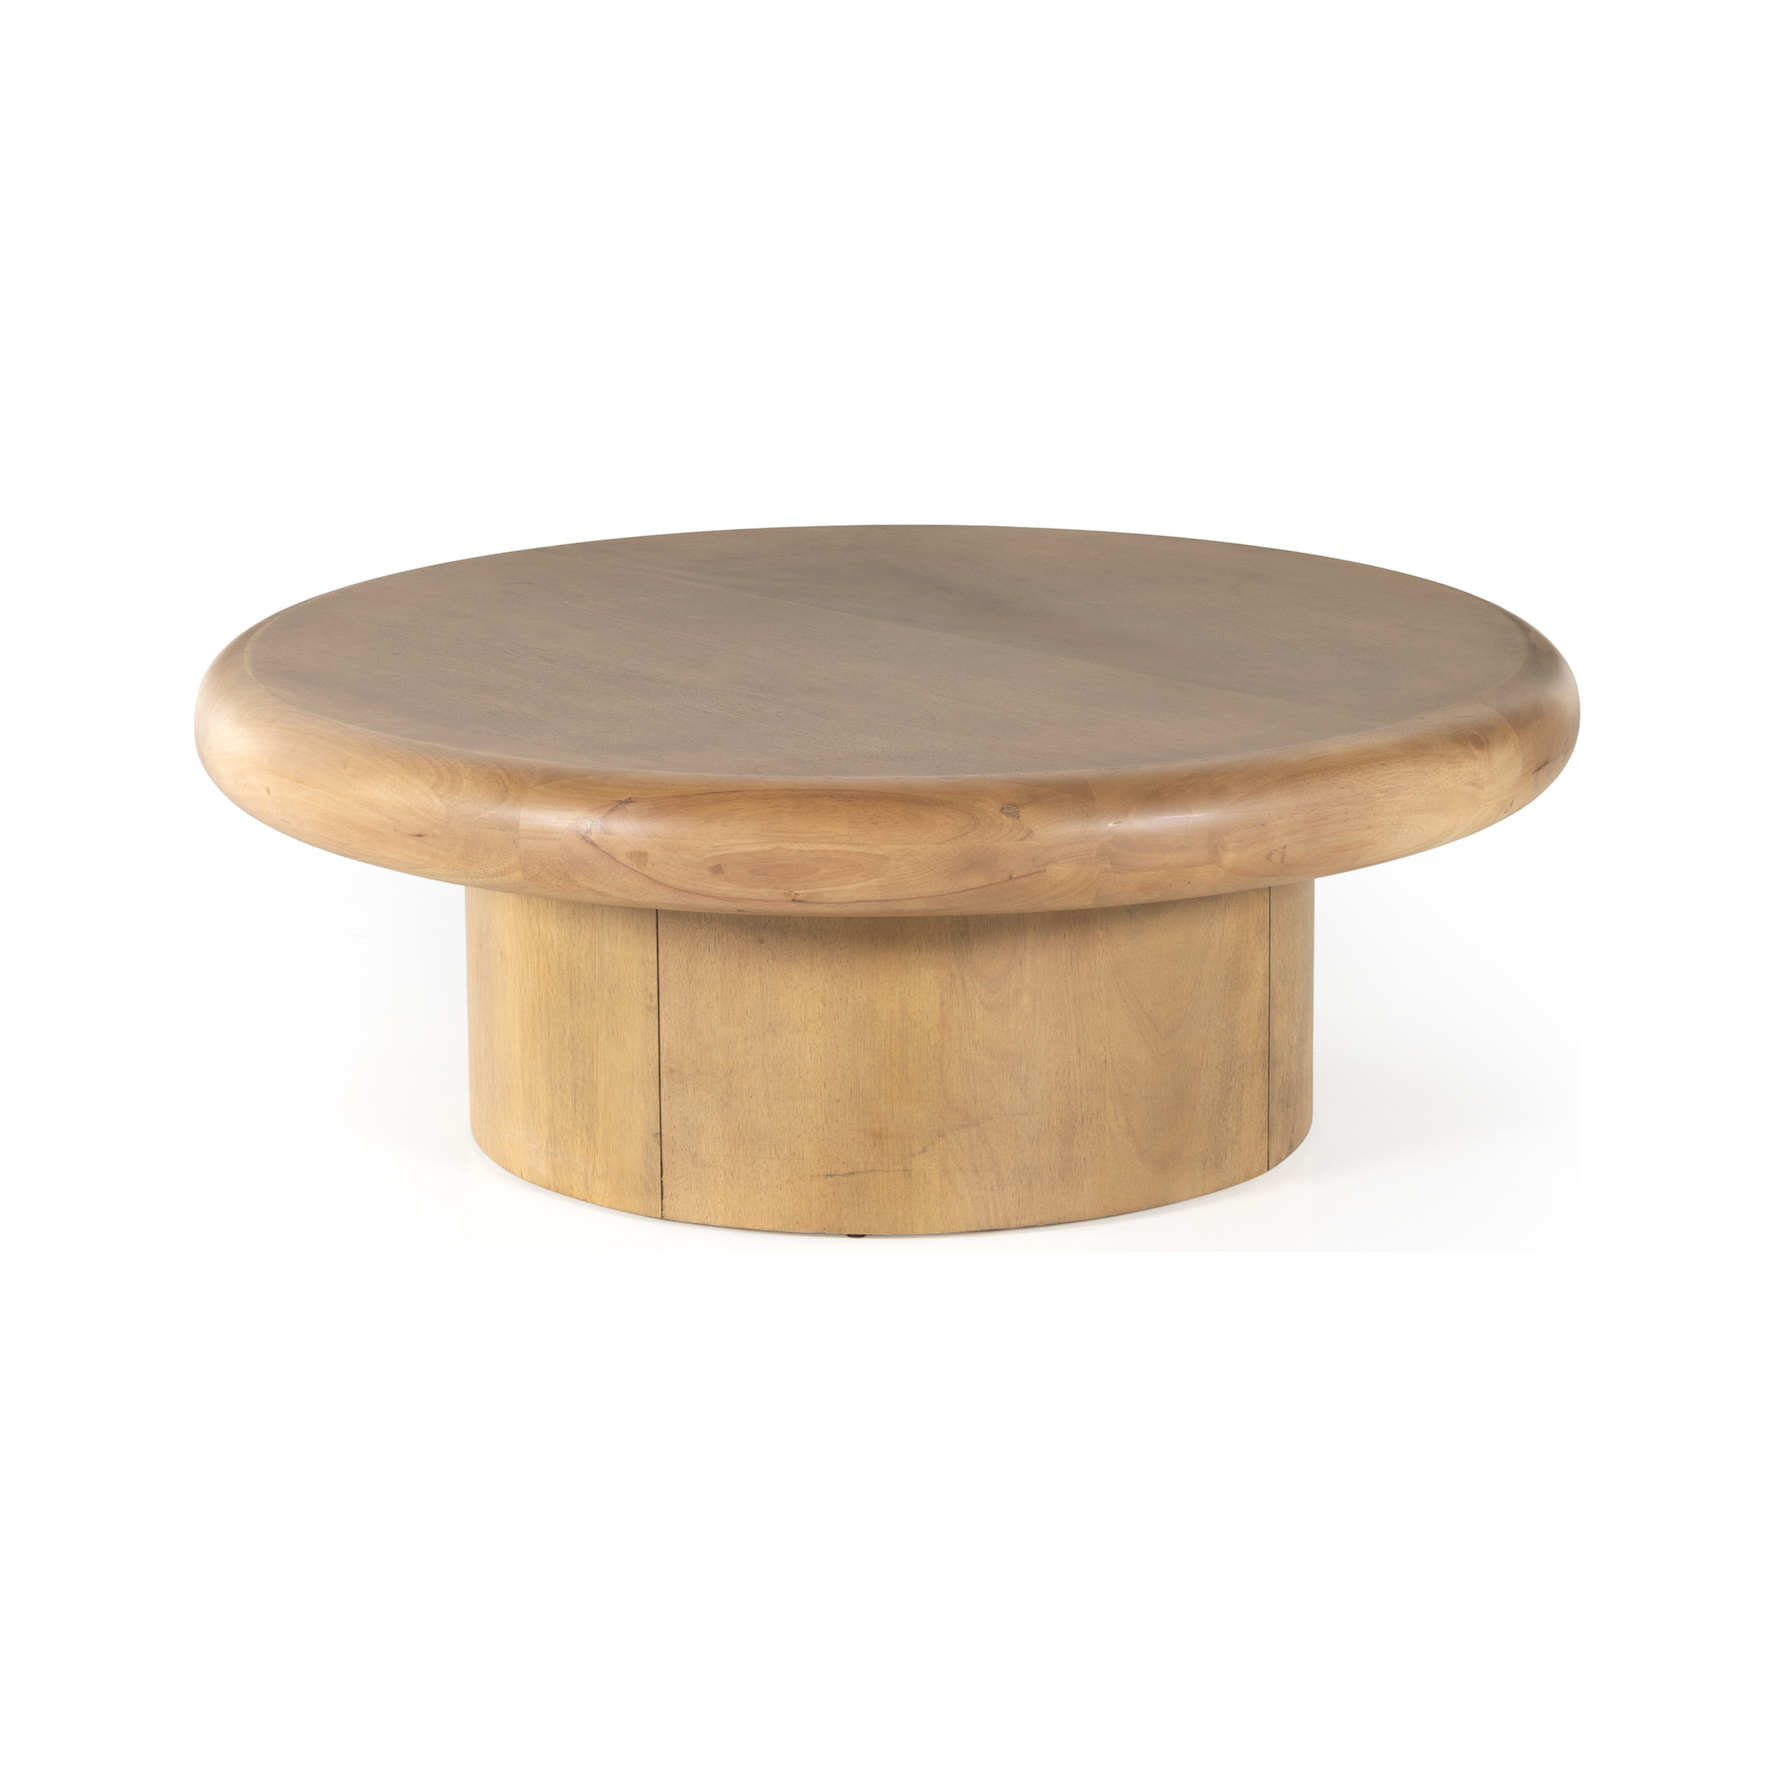 The Zach coffee table in burnished parawood features a pedestal-style base on a rounded tabletop with bullnose edging, for style and softness alike. Amethyst Home provides interior design, furniture, rugs, and design services in the Omaha metro area.